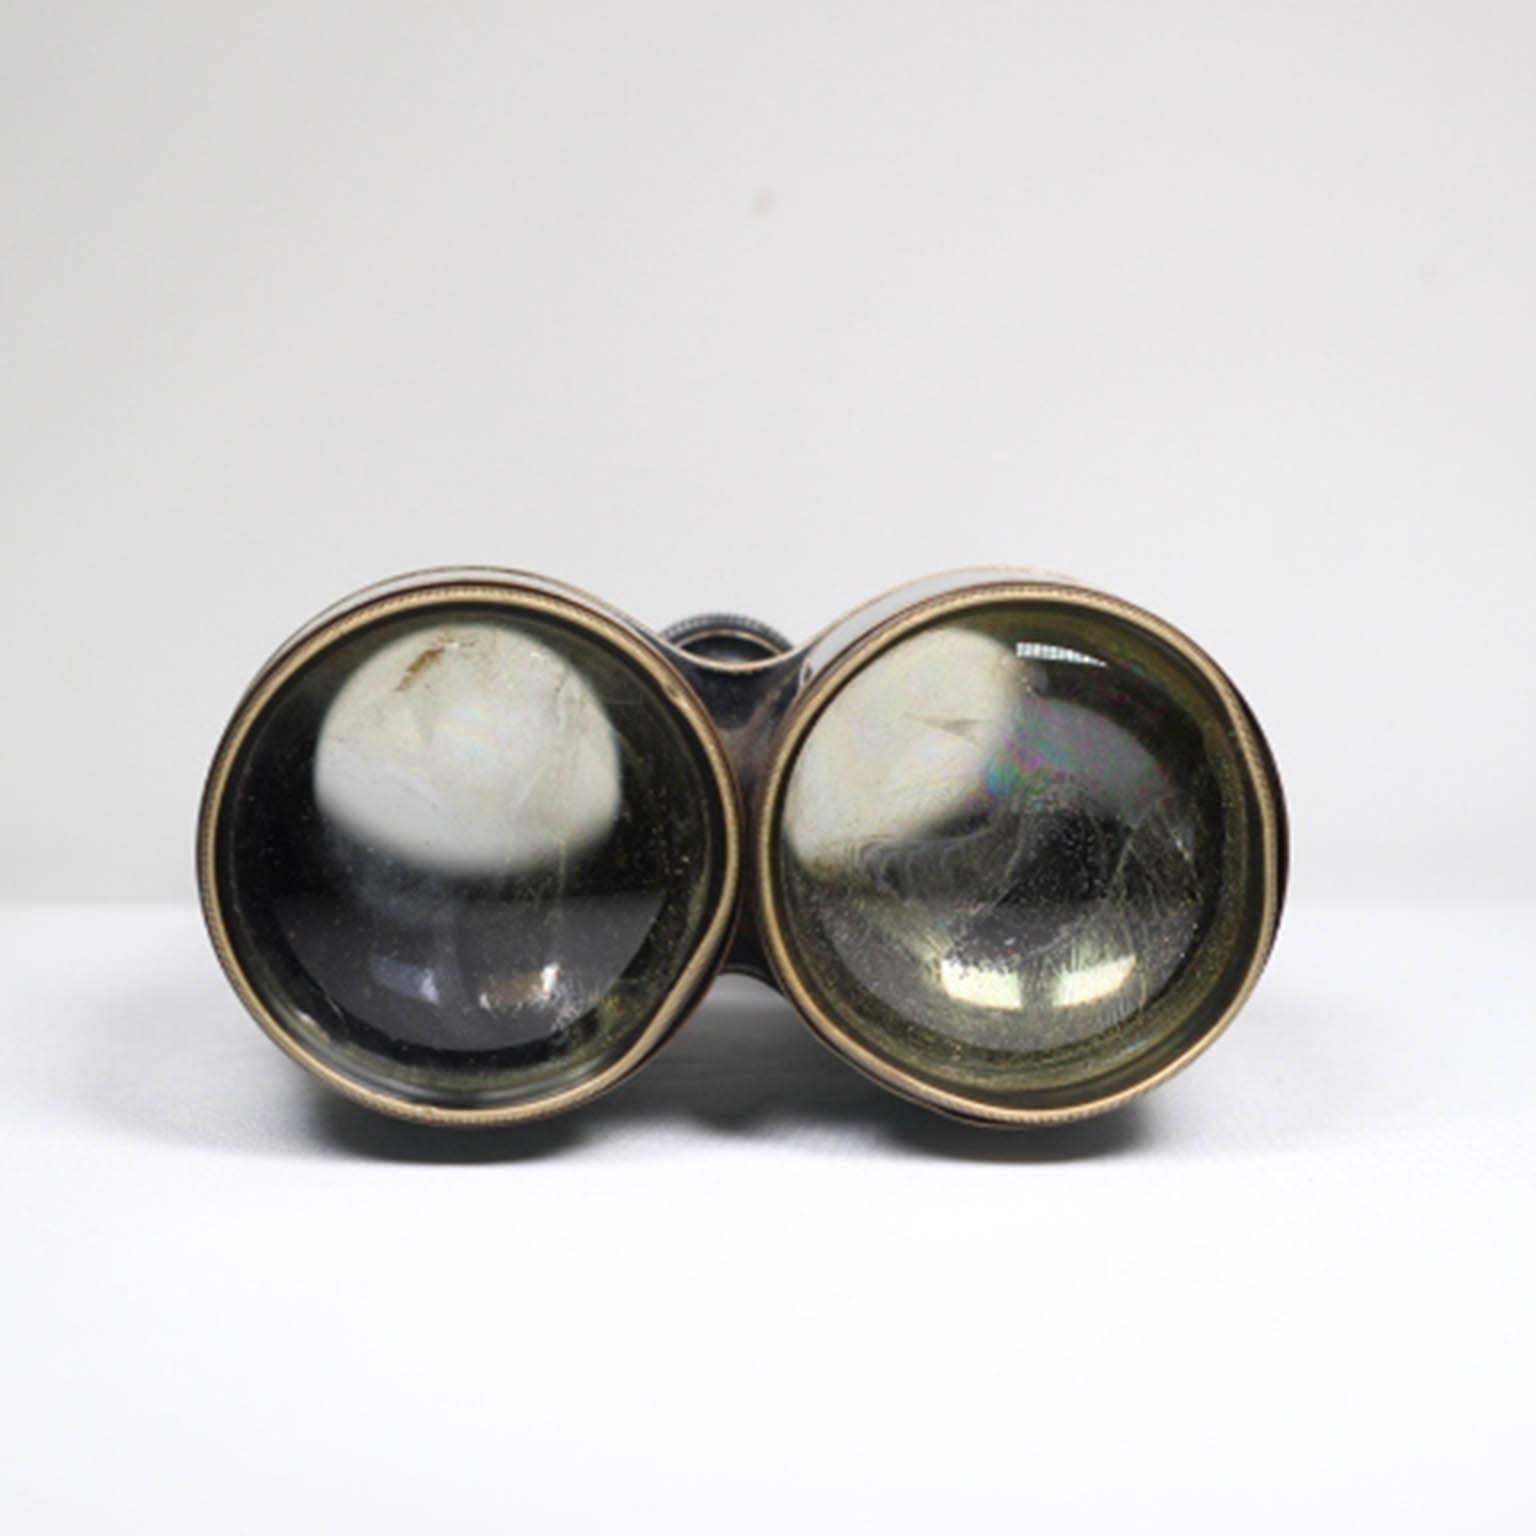 Antique brass binoculars in good working order by G. Falconer and Co. Hong Kong, circa 1800s.